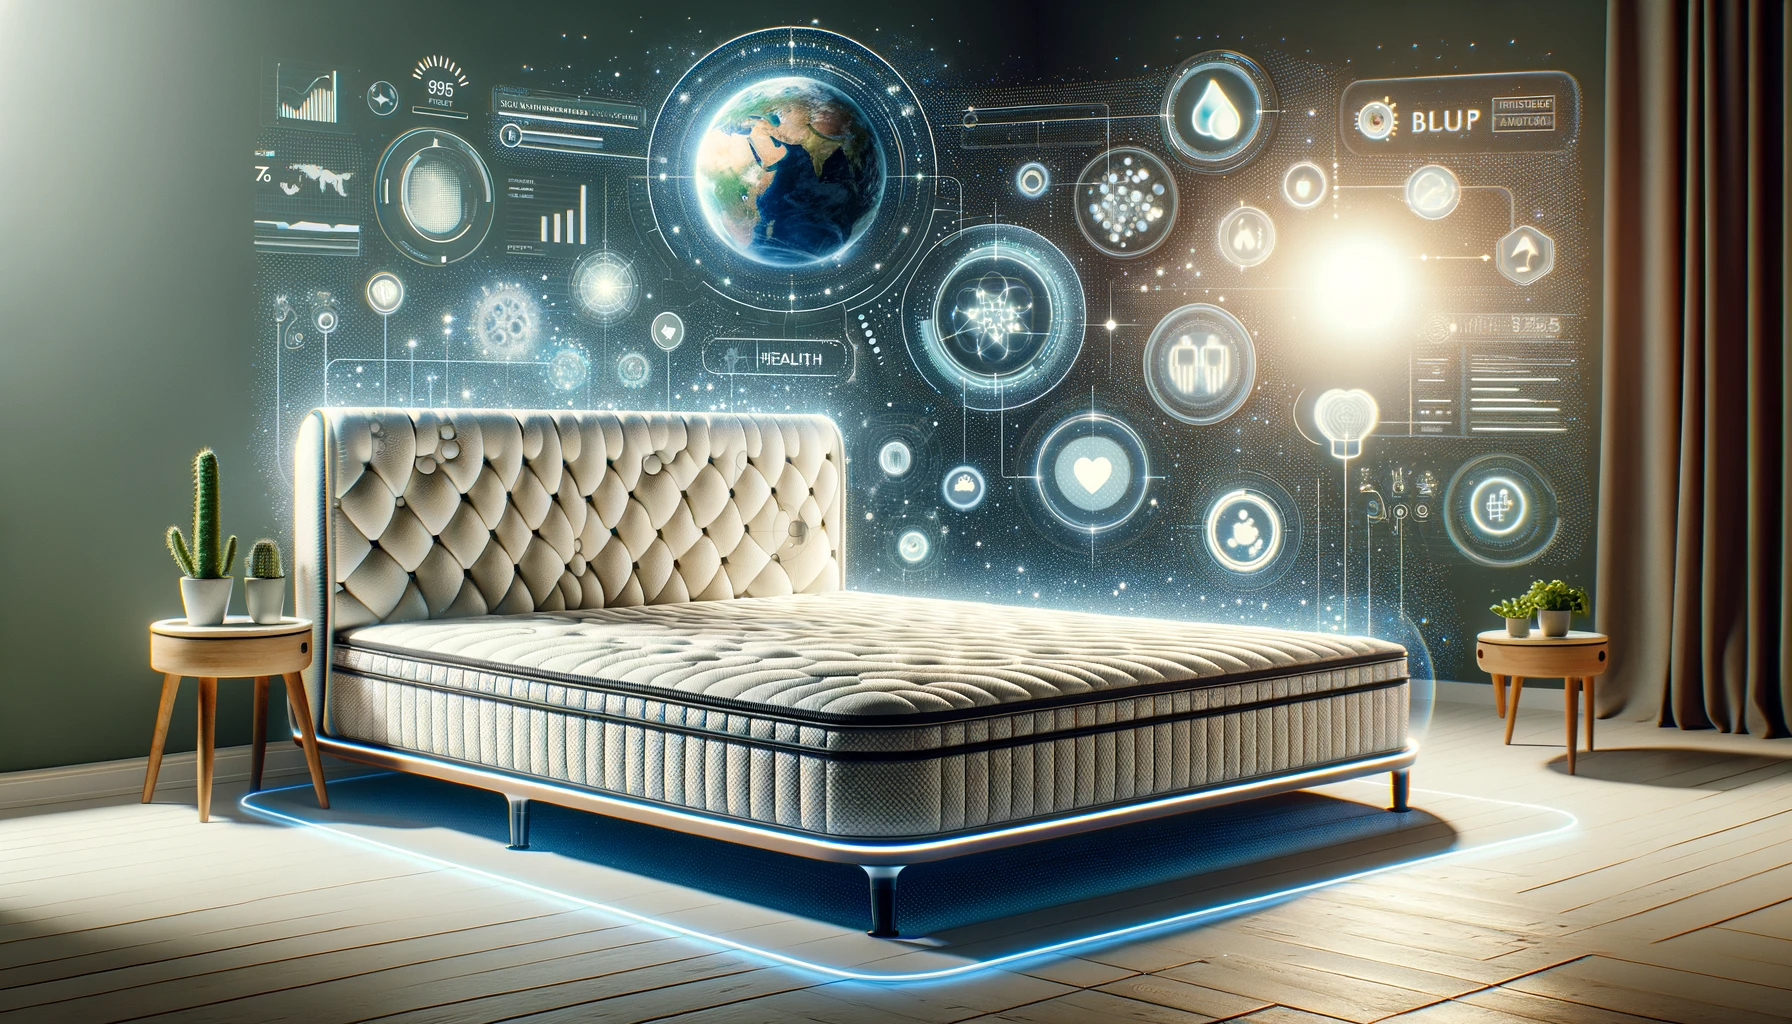 A visually inspiring image capturing the essence of the bright future of sleep technology. The scene includes a futuristic mattress integrated with high-tech features symbolizing personalization, health, and sustainability.